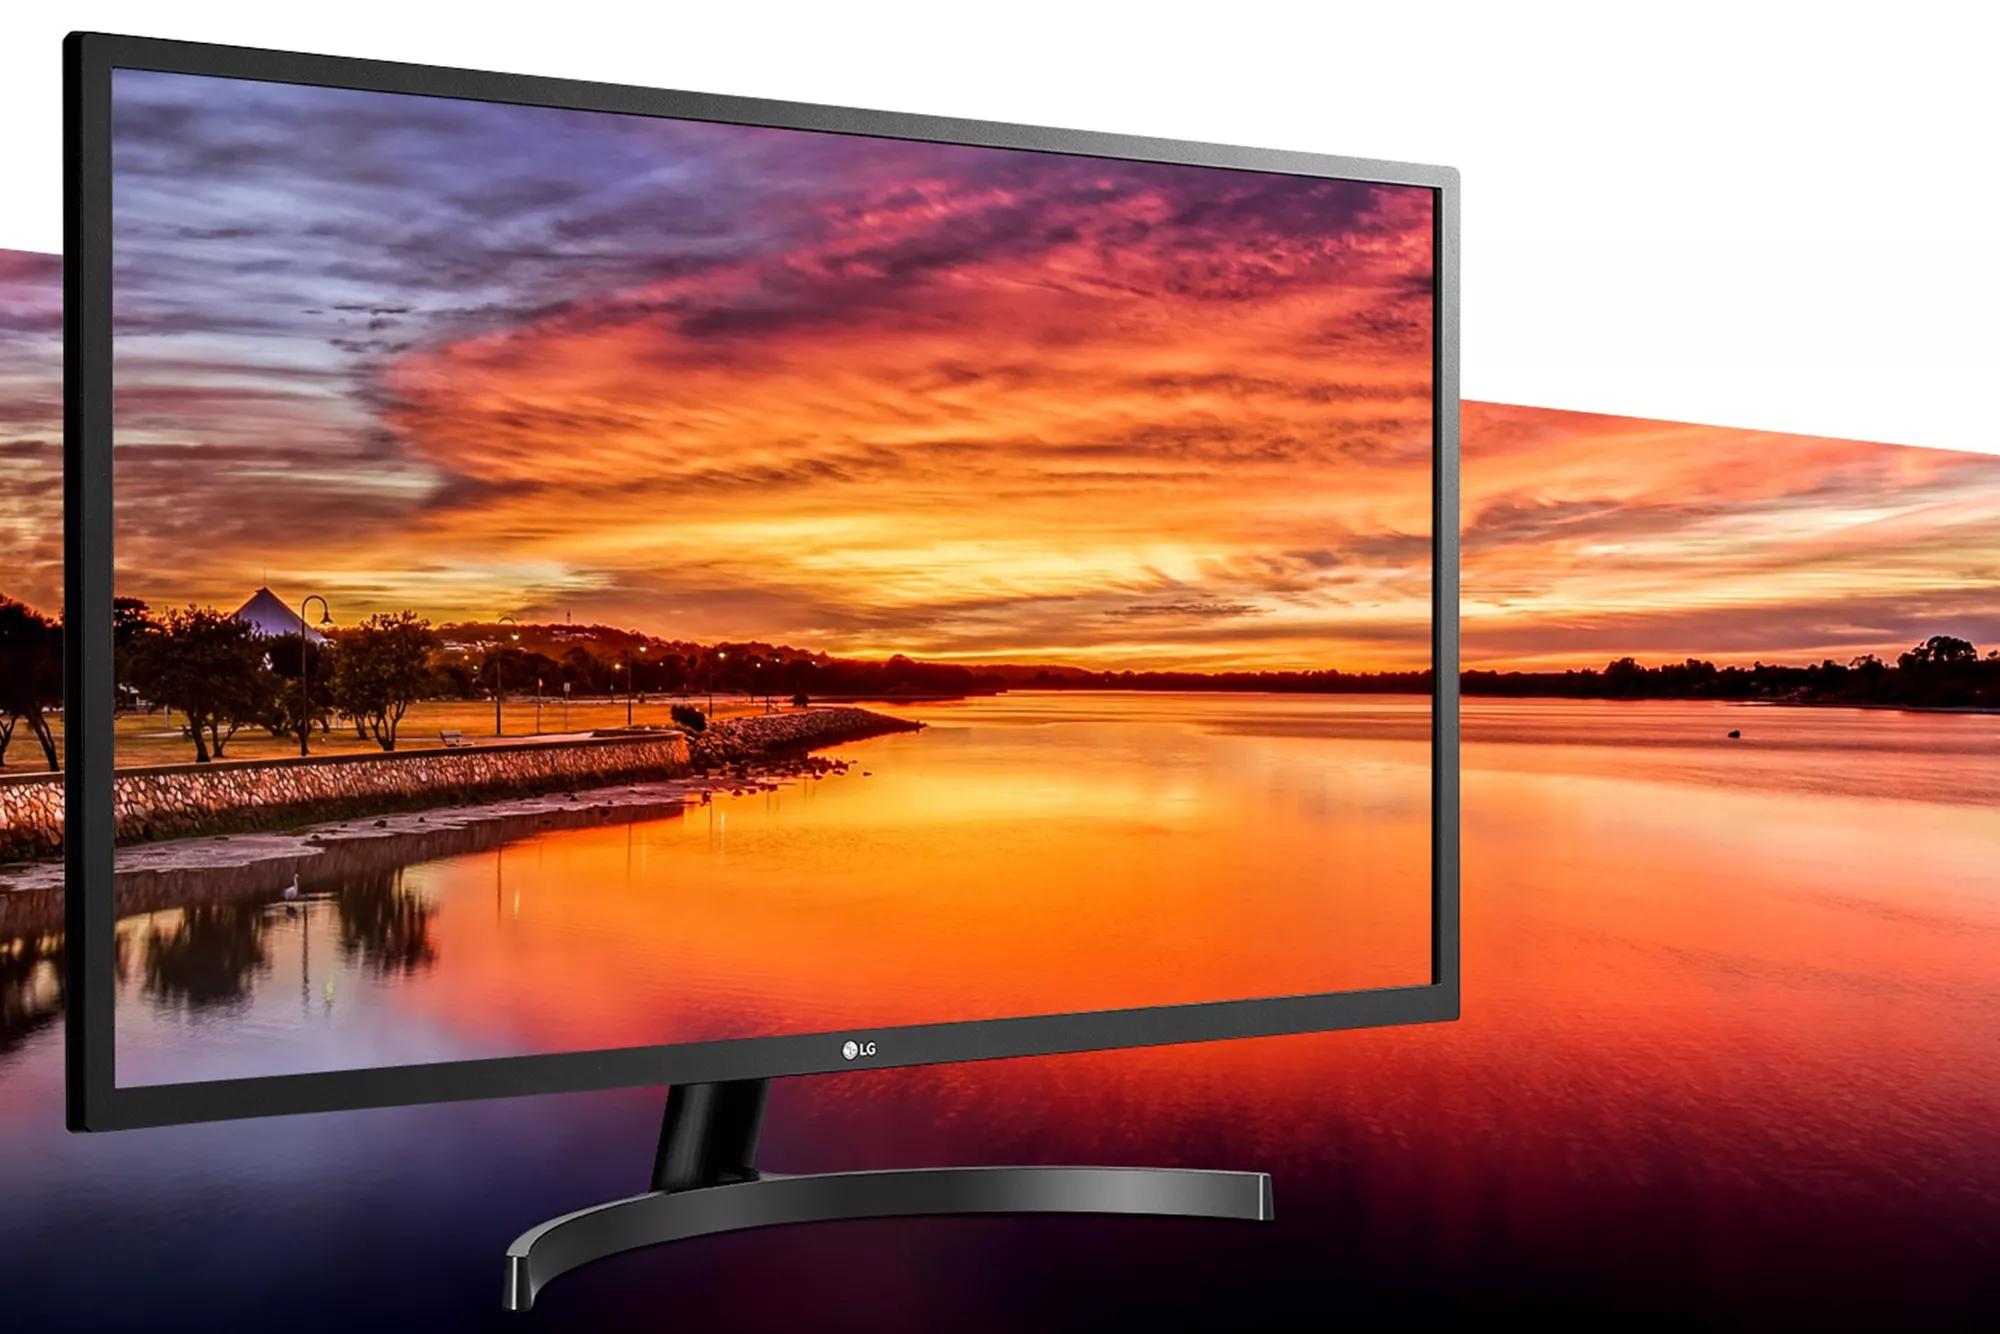 True Color at Any Angle by Full HD IPS Display